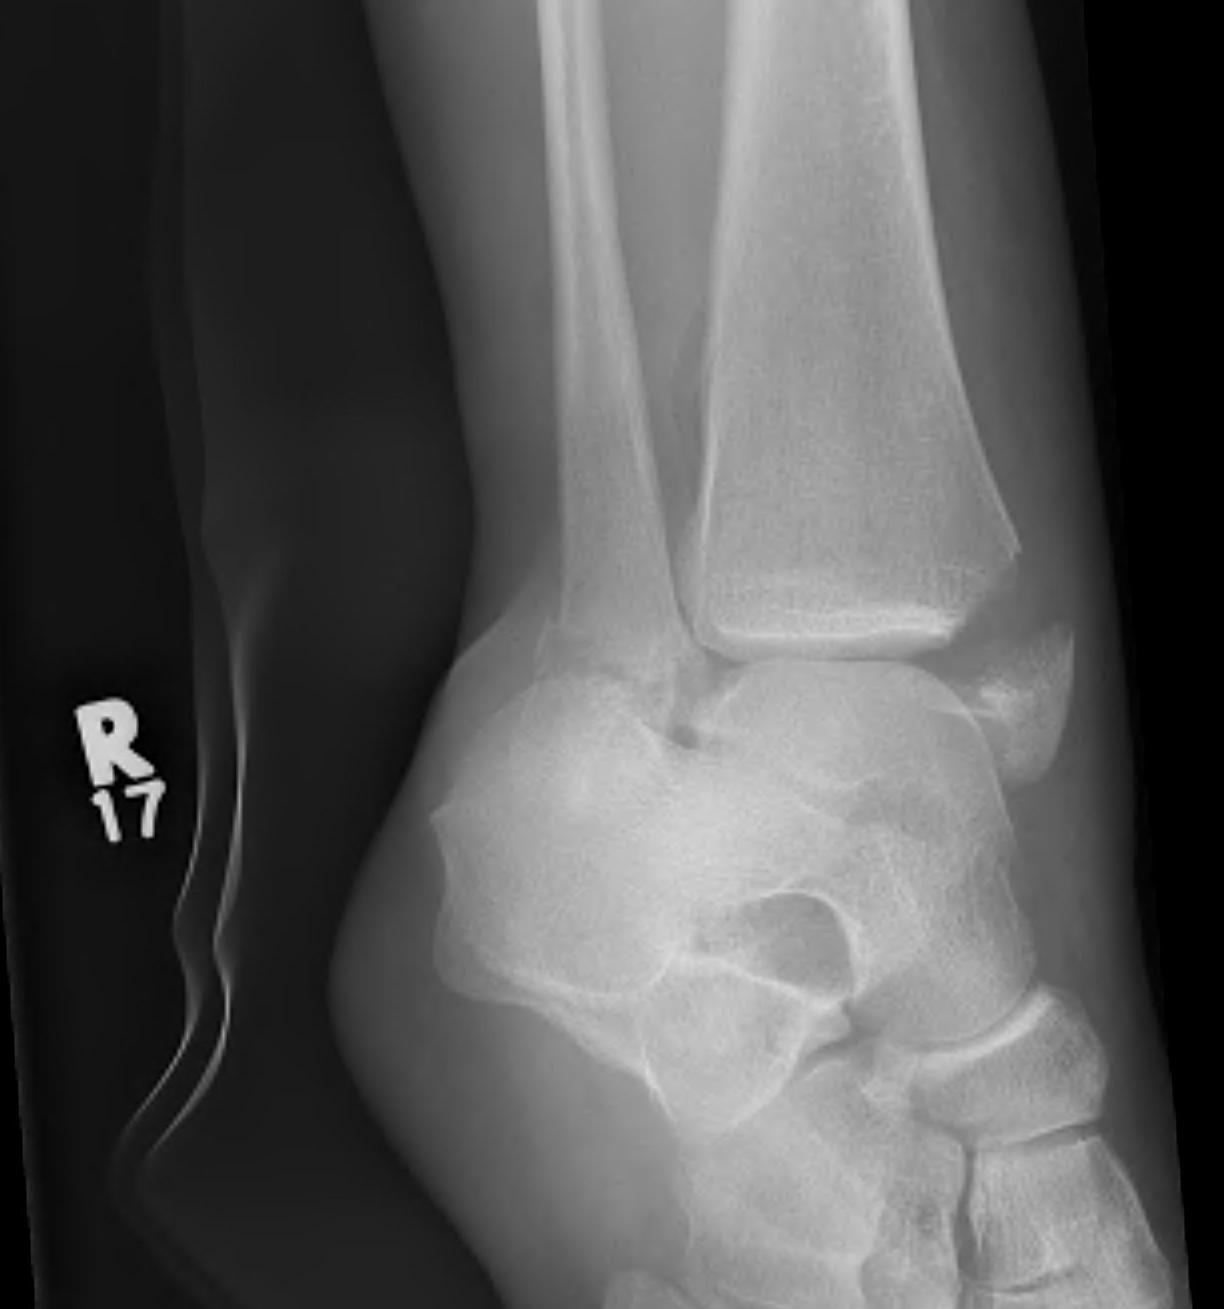 Ankle Fracture Supination Adduction